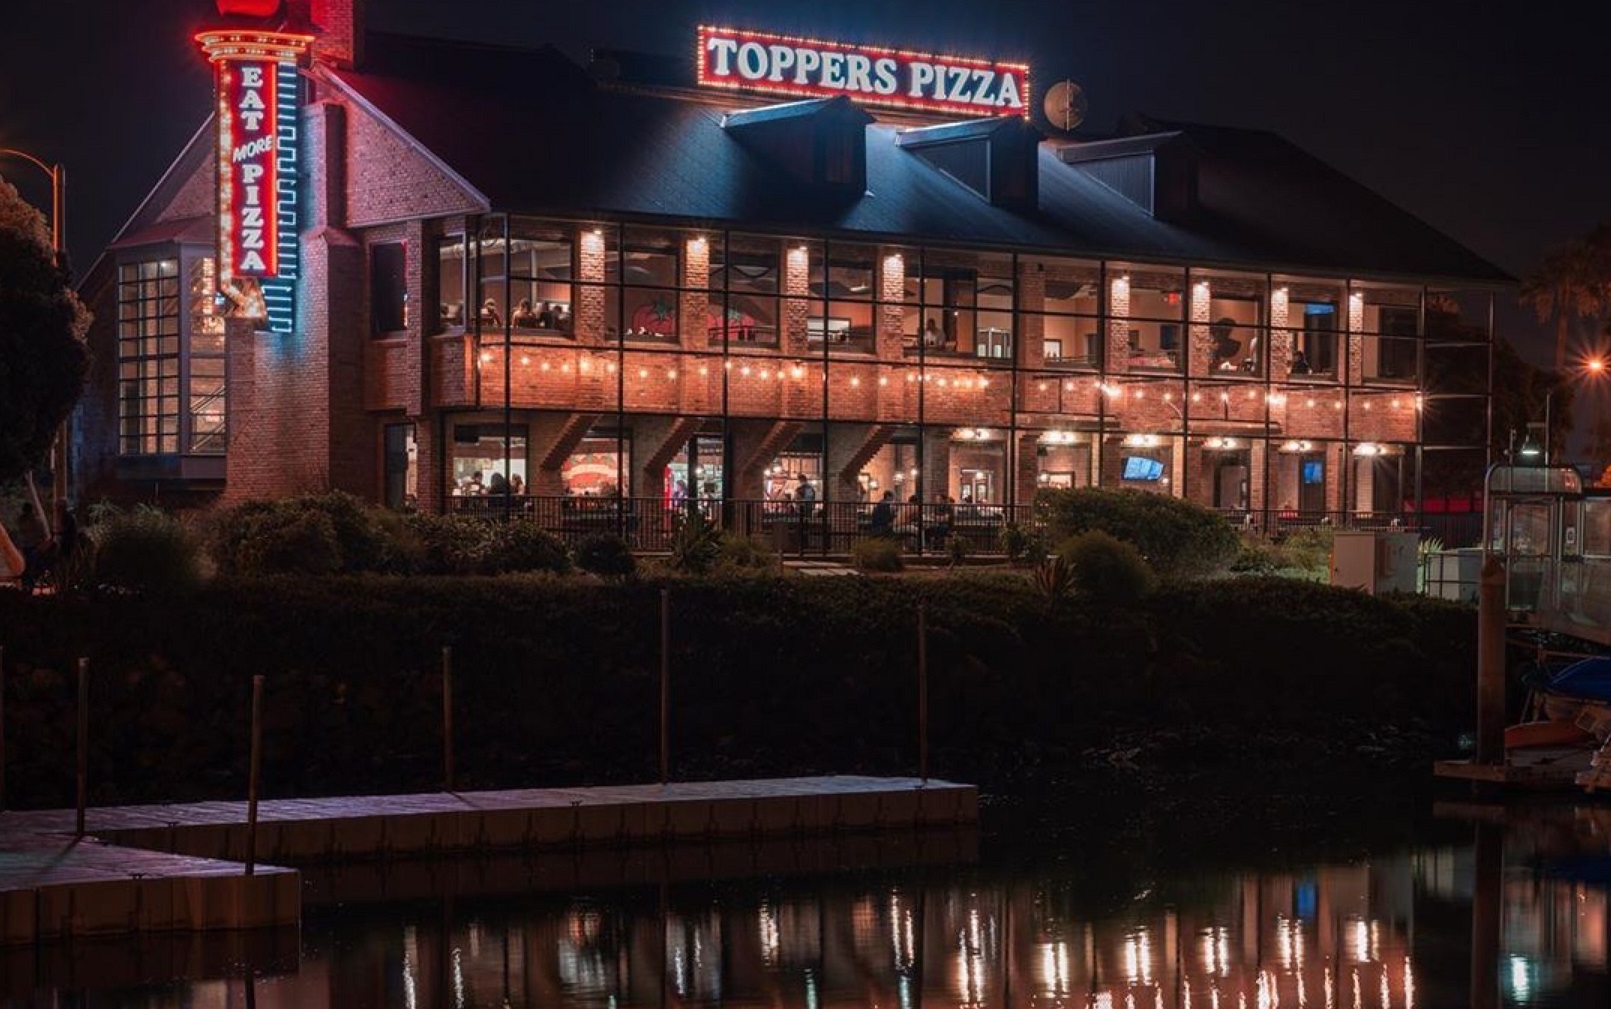 Toppers Pizza, lit up for the holidays